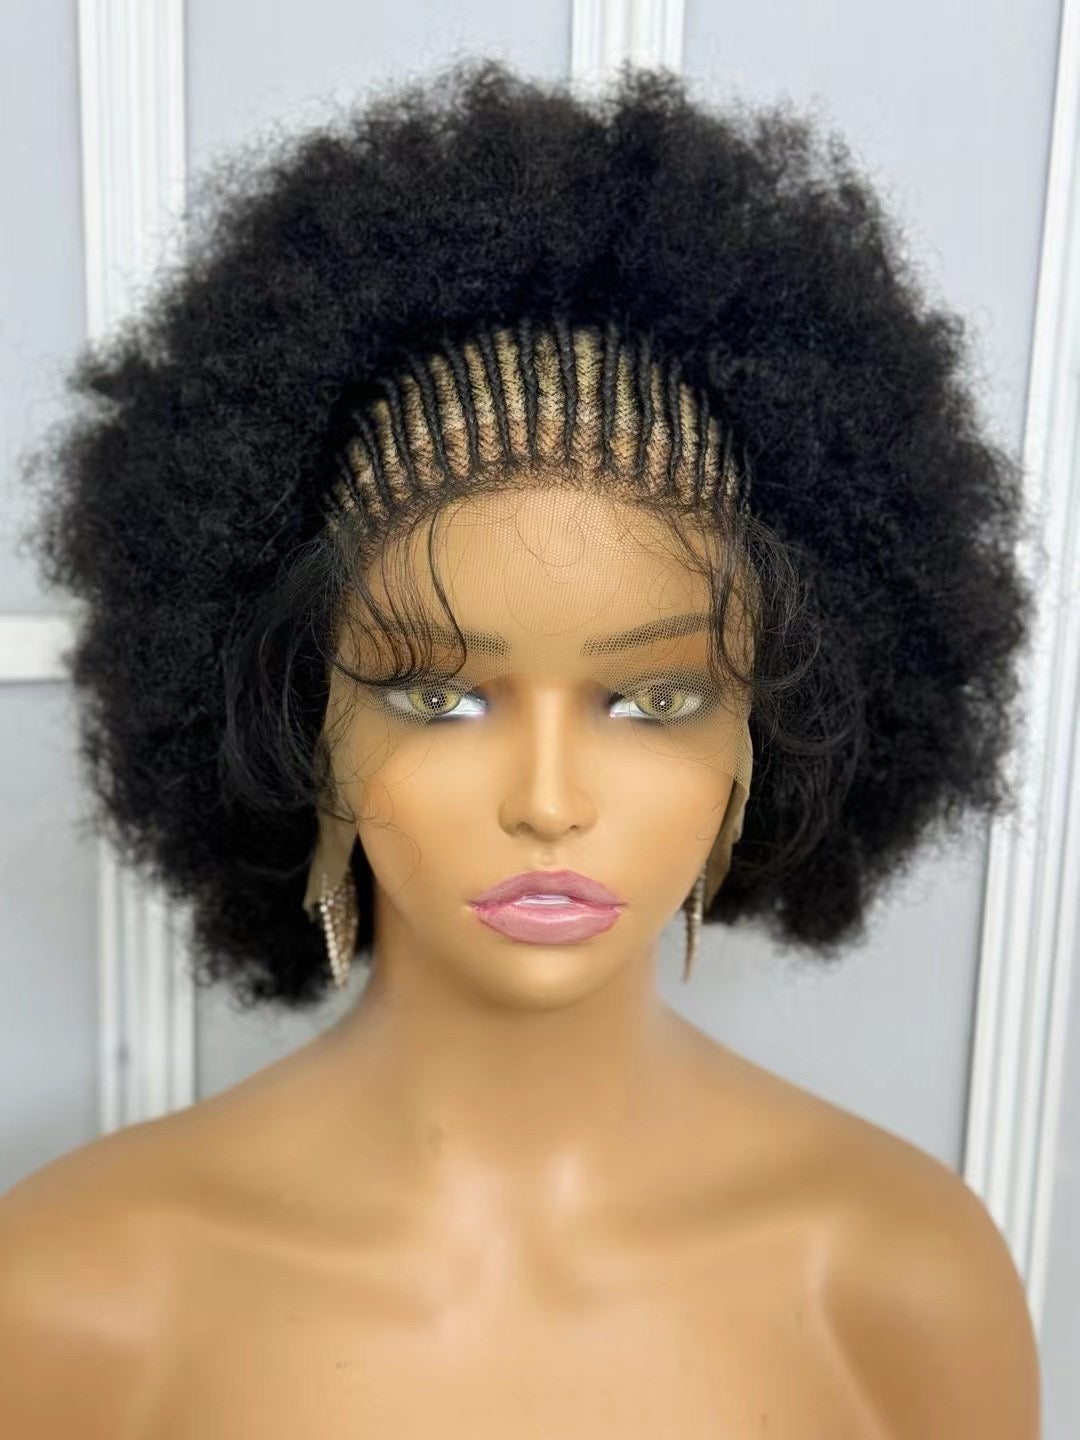 250% Density 13x6 Hd Lace Frontal Braided Wig Afro Kinky Curly Synthetic Wig Baby Hair Fluffy Curled Striped Braided Curly wig